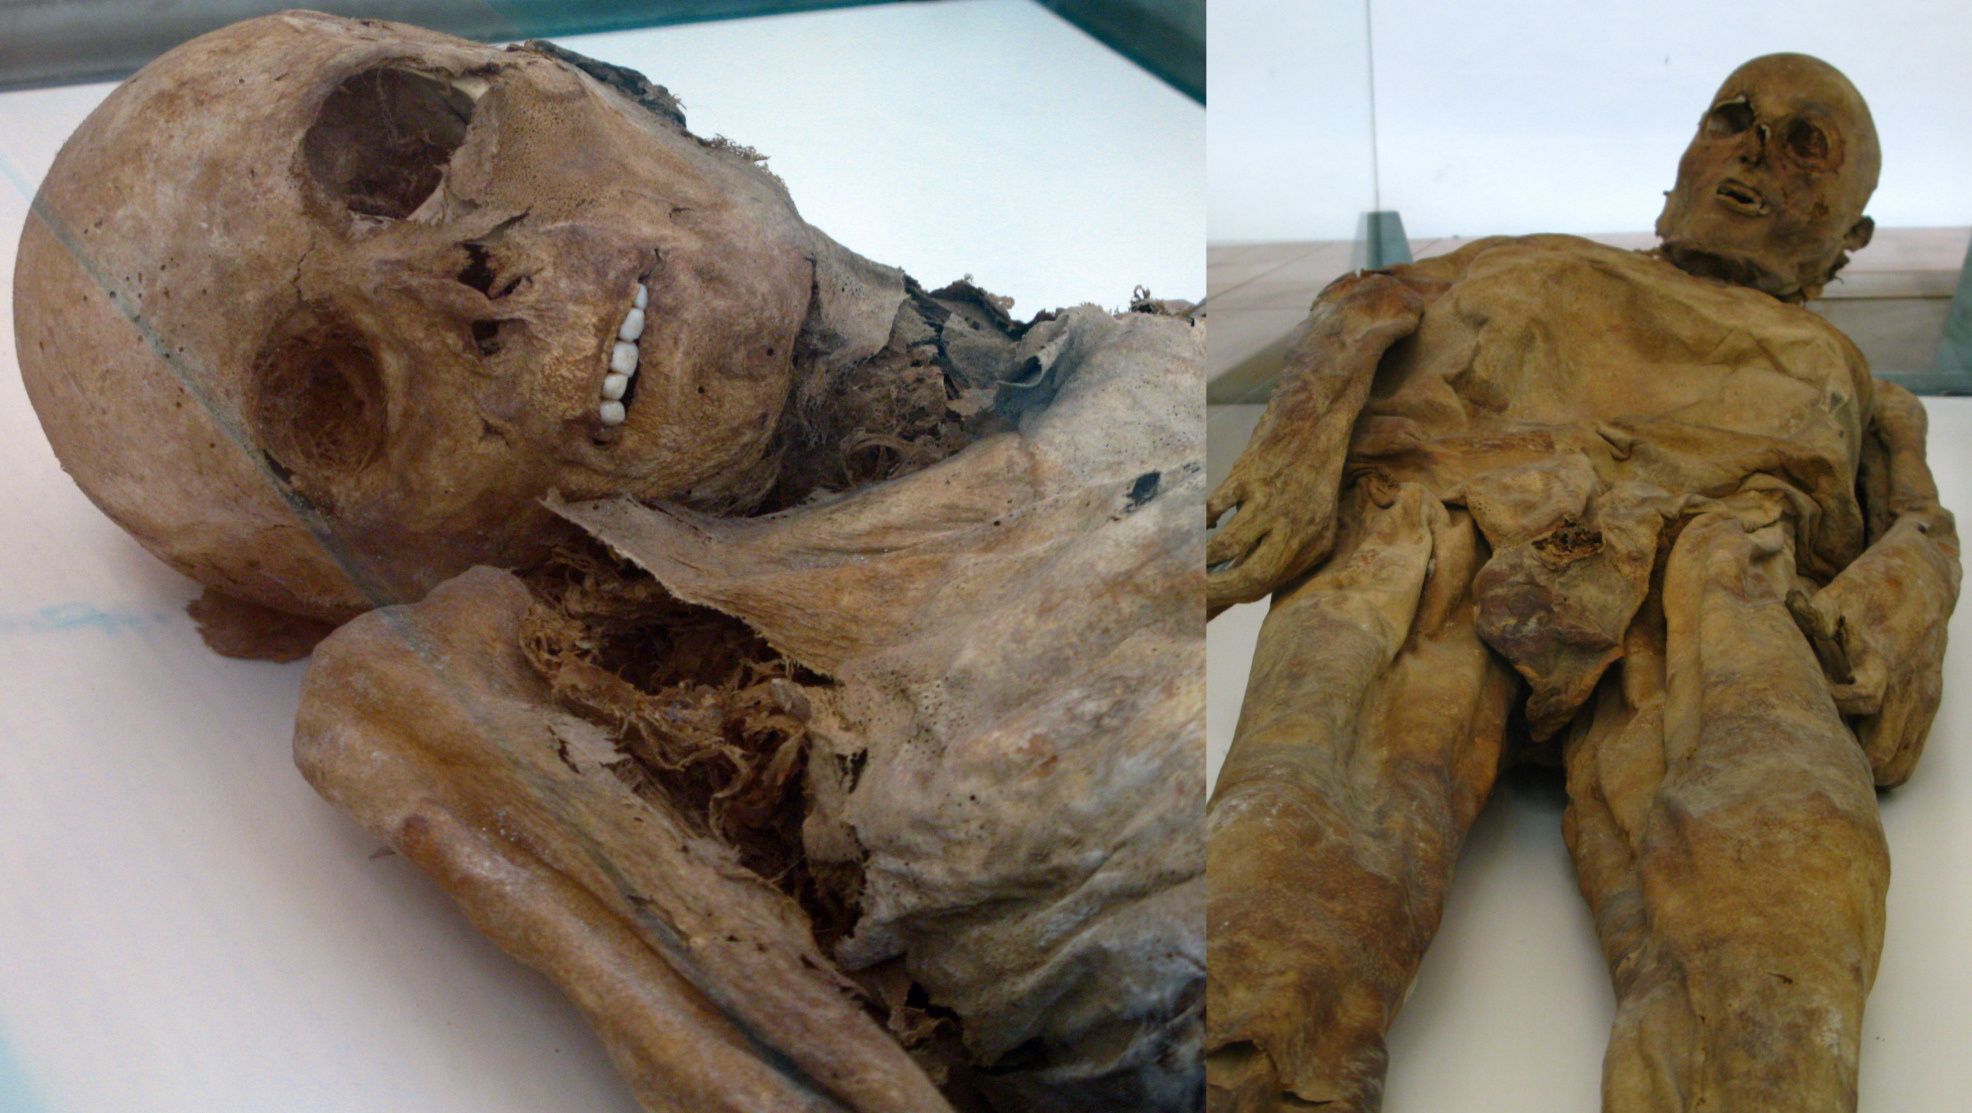 Two of the creepily preserved Venzone mummies. With normal decomposition, teeth tend to fall out several weeks after death.